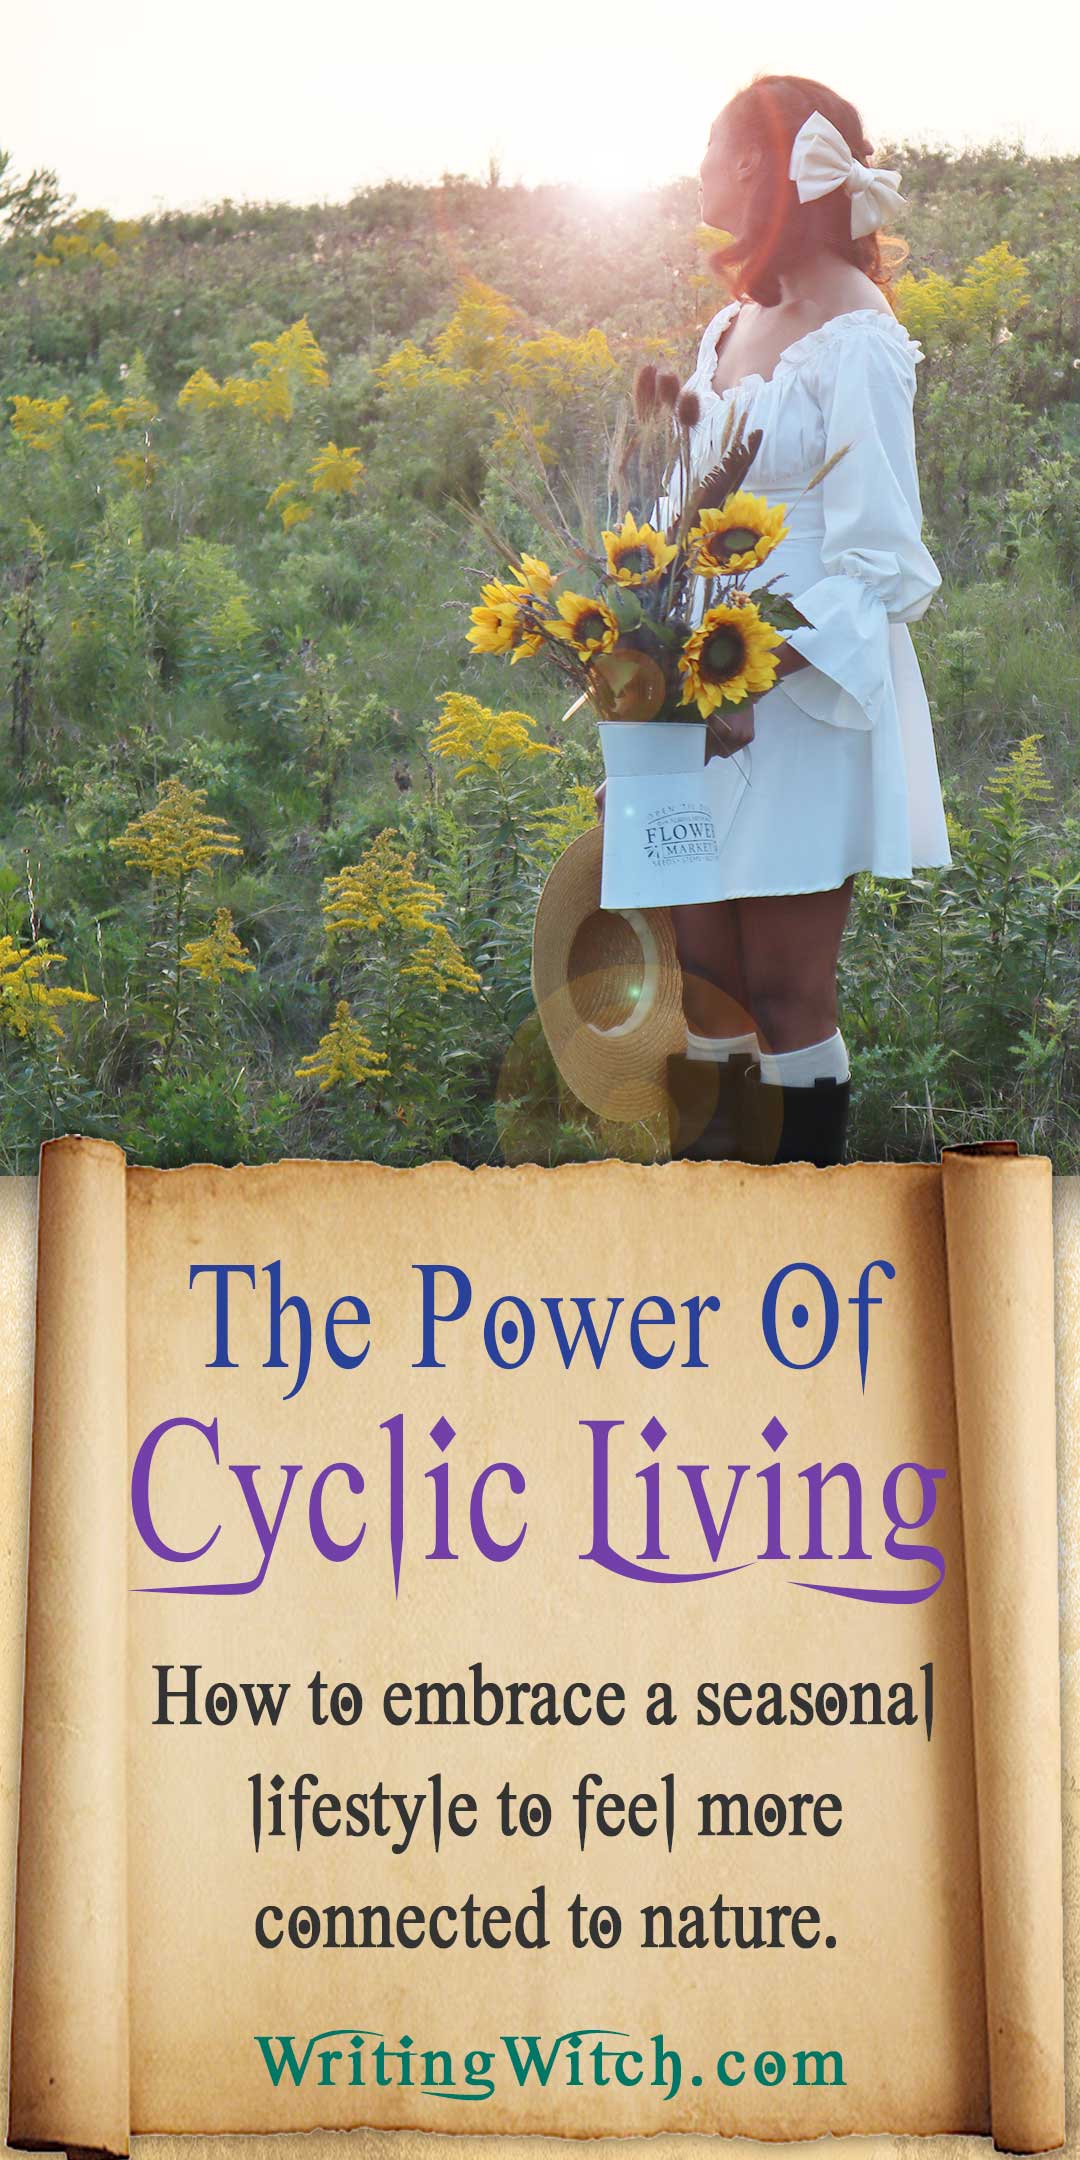 Cyclical Living (Podcast With Flora Ware)